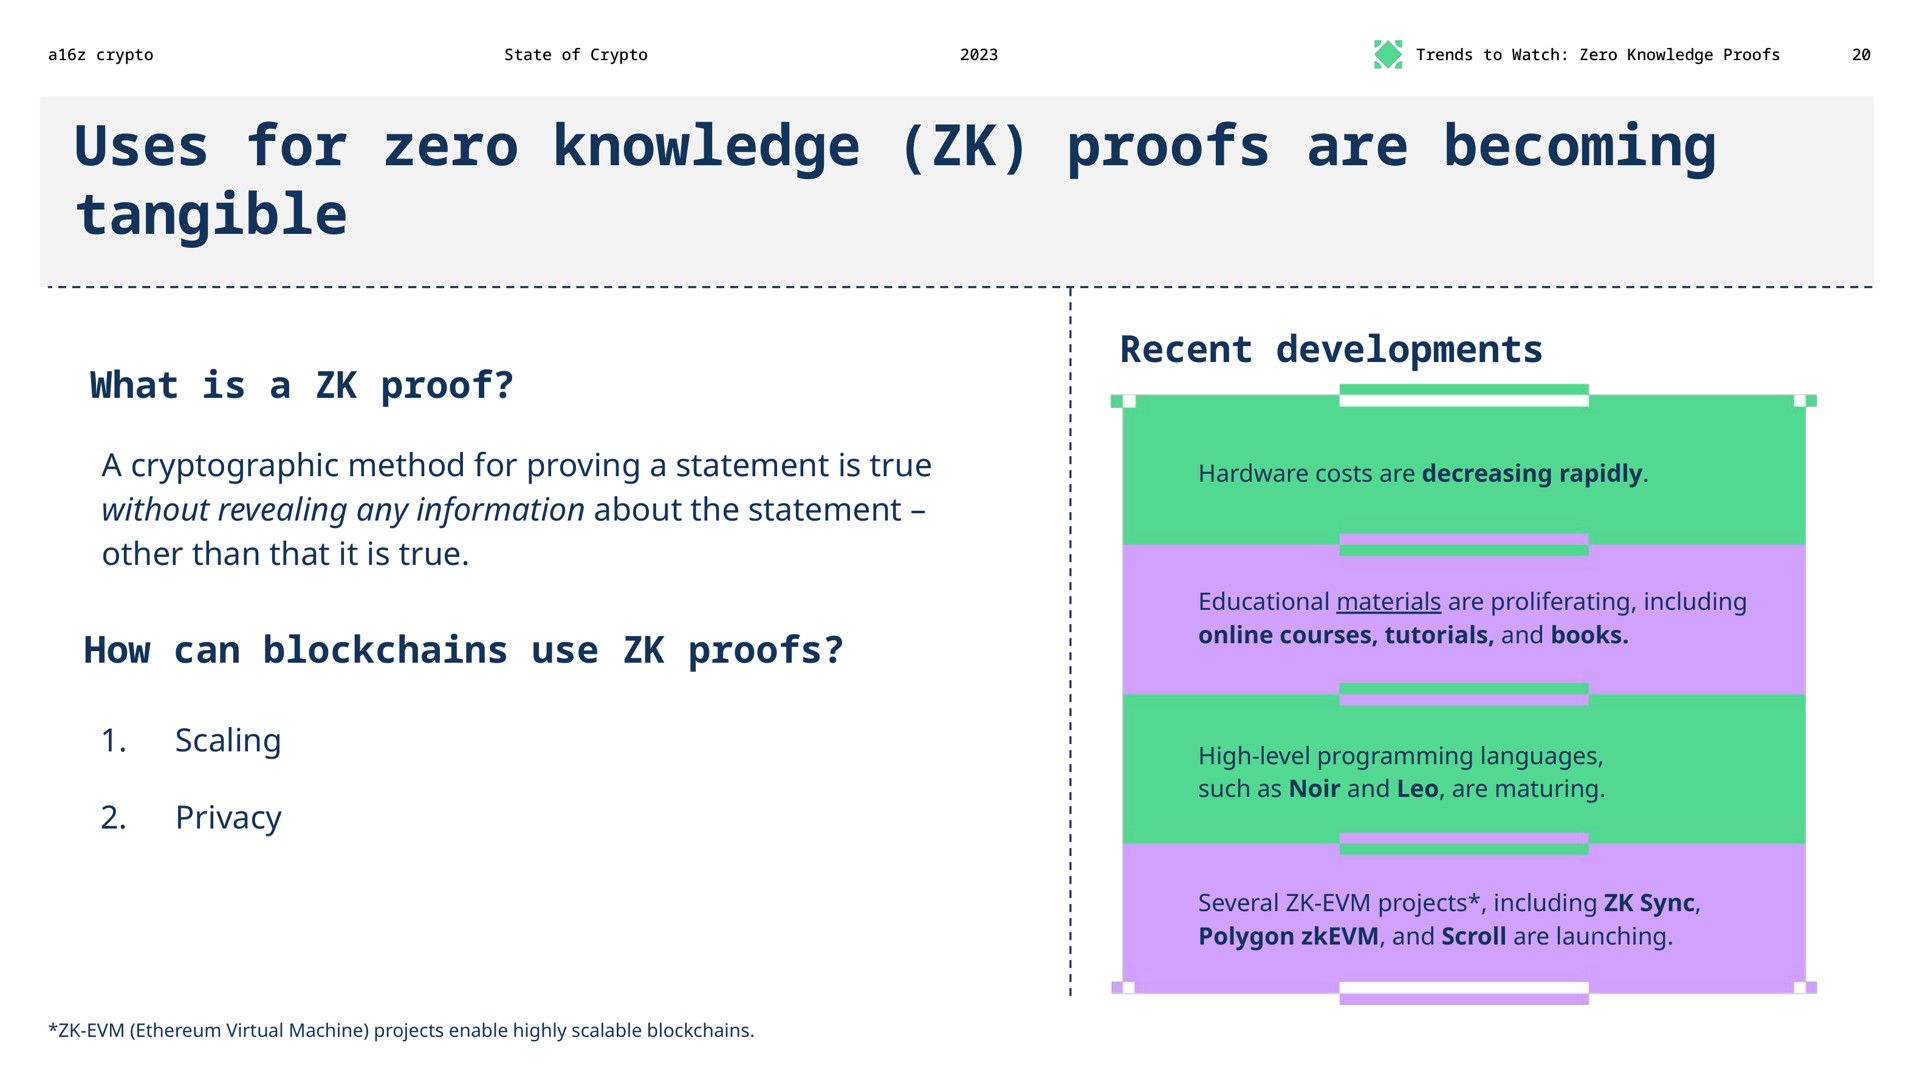 uses for zero knowledge proofs are becoming tangible what is a proof a cryptographic method for proving a statement is true without revealing any information about the statement other than that it is true how can use proofs scaling privacy recent developments | a16z